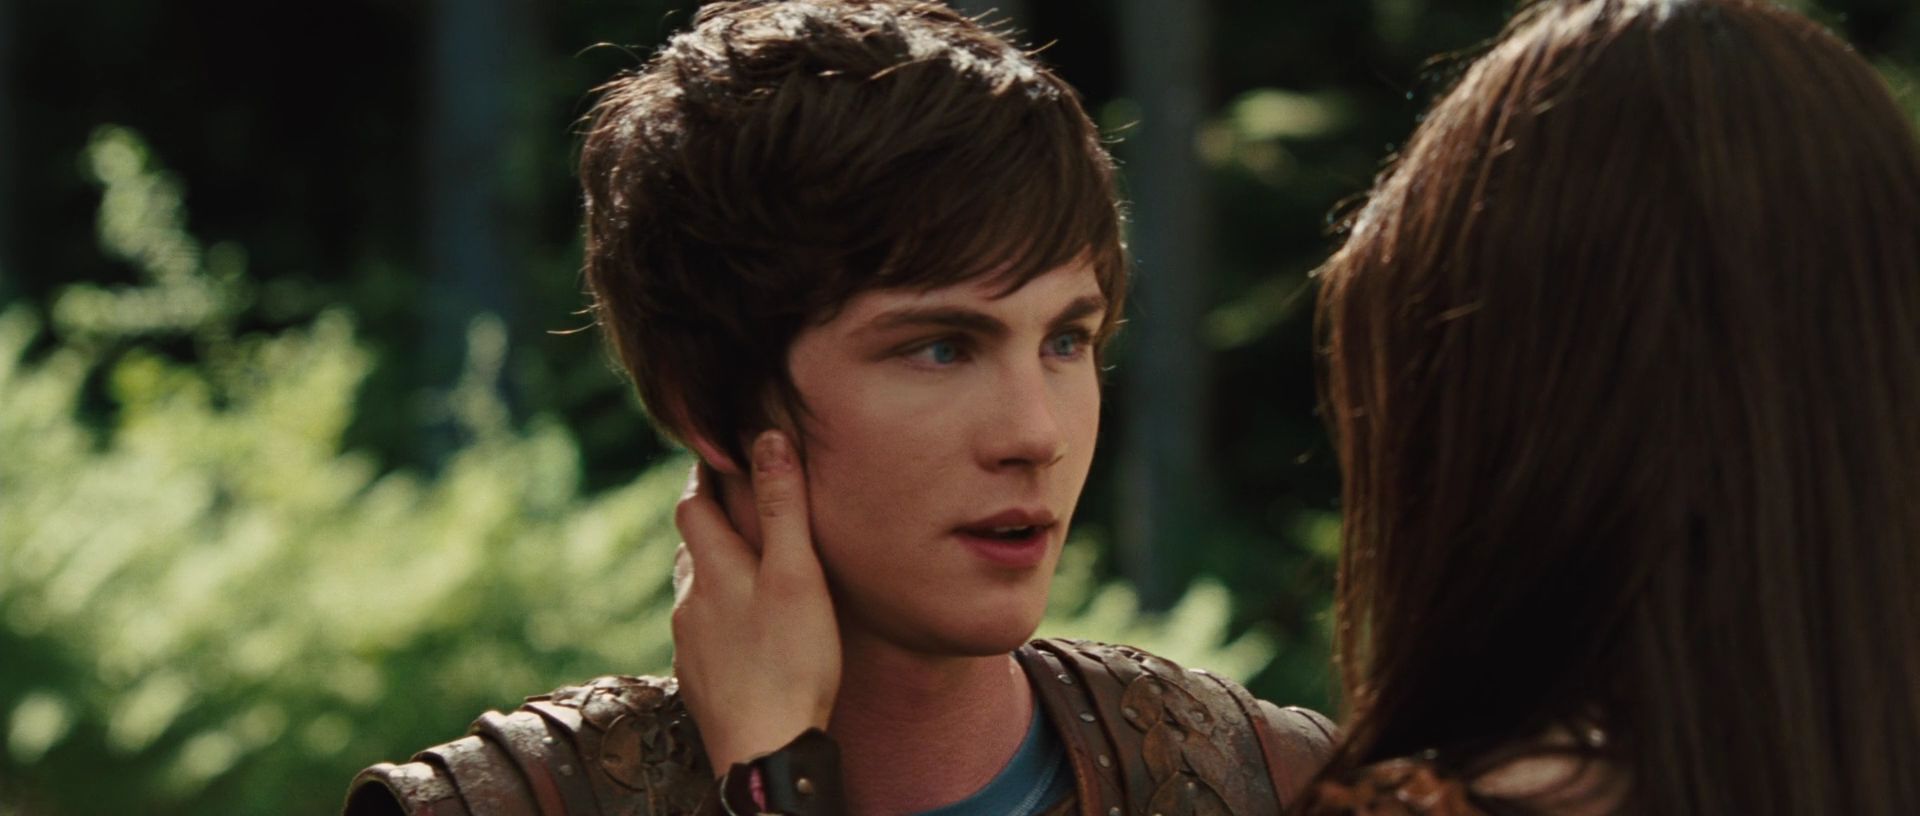 percy jackson and annabeth chase, images, image, wallpaper, photos, photo, ...